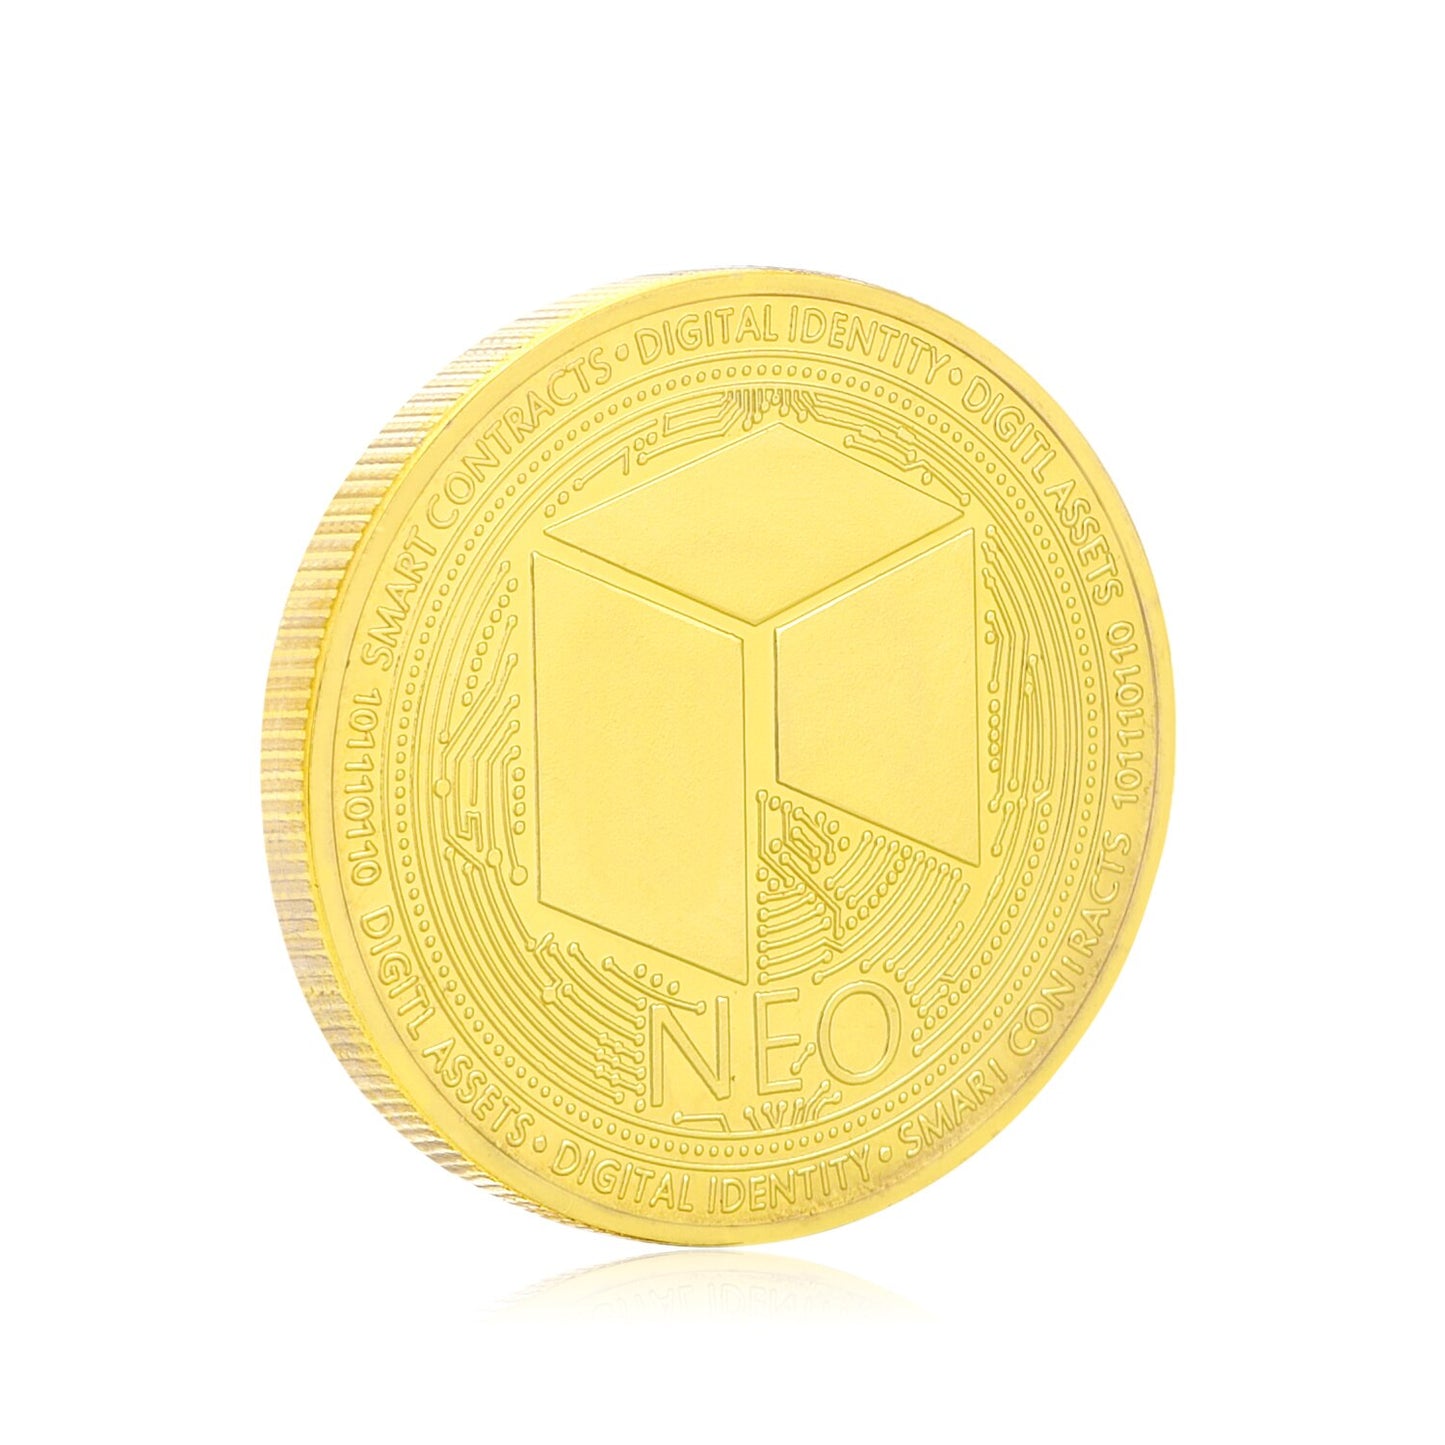 NEO crypto coin gold  plated